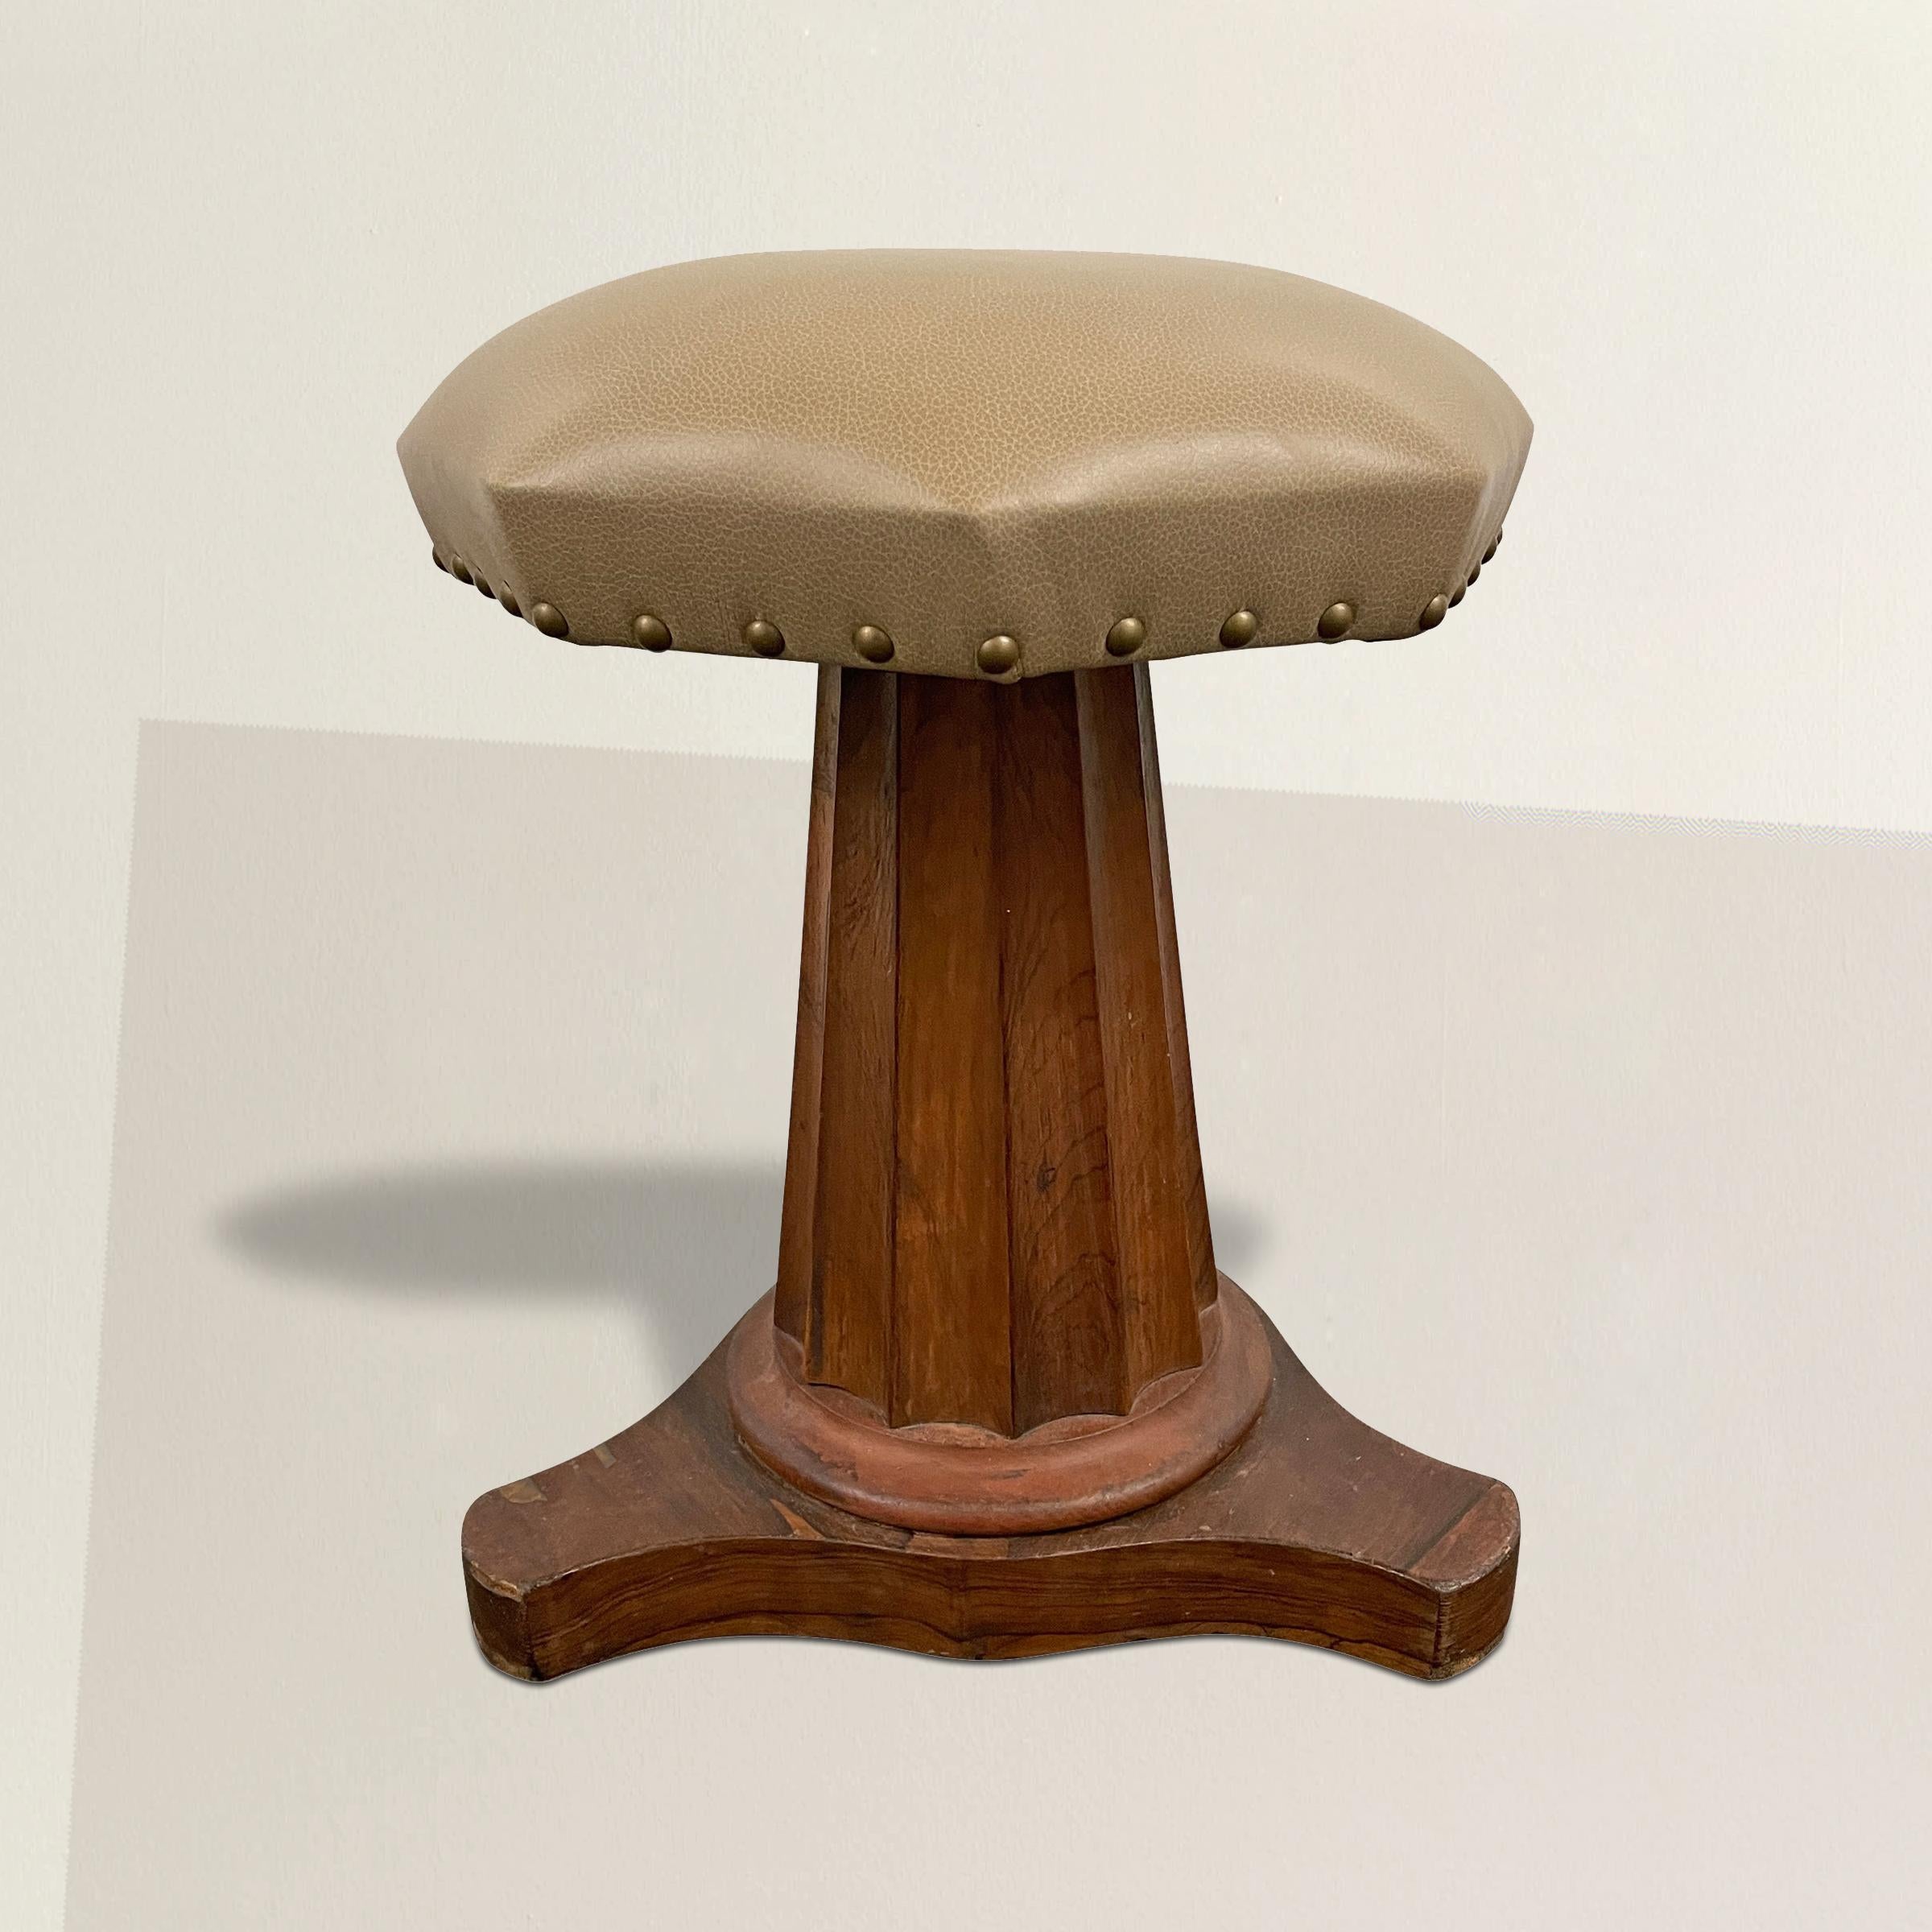 A charming and handsome early 19th century American Empire mahogany stool with a tapered fluted Doric column supported by a flat three legged base, and an octagonal seat with a gray leather upholstery and nail head trim. Perfect for extra seating in